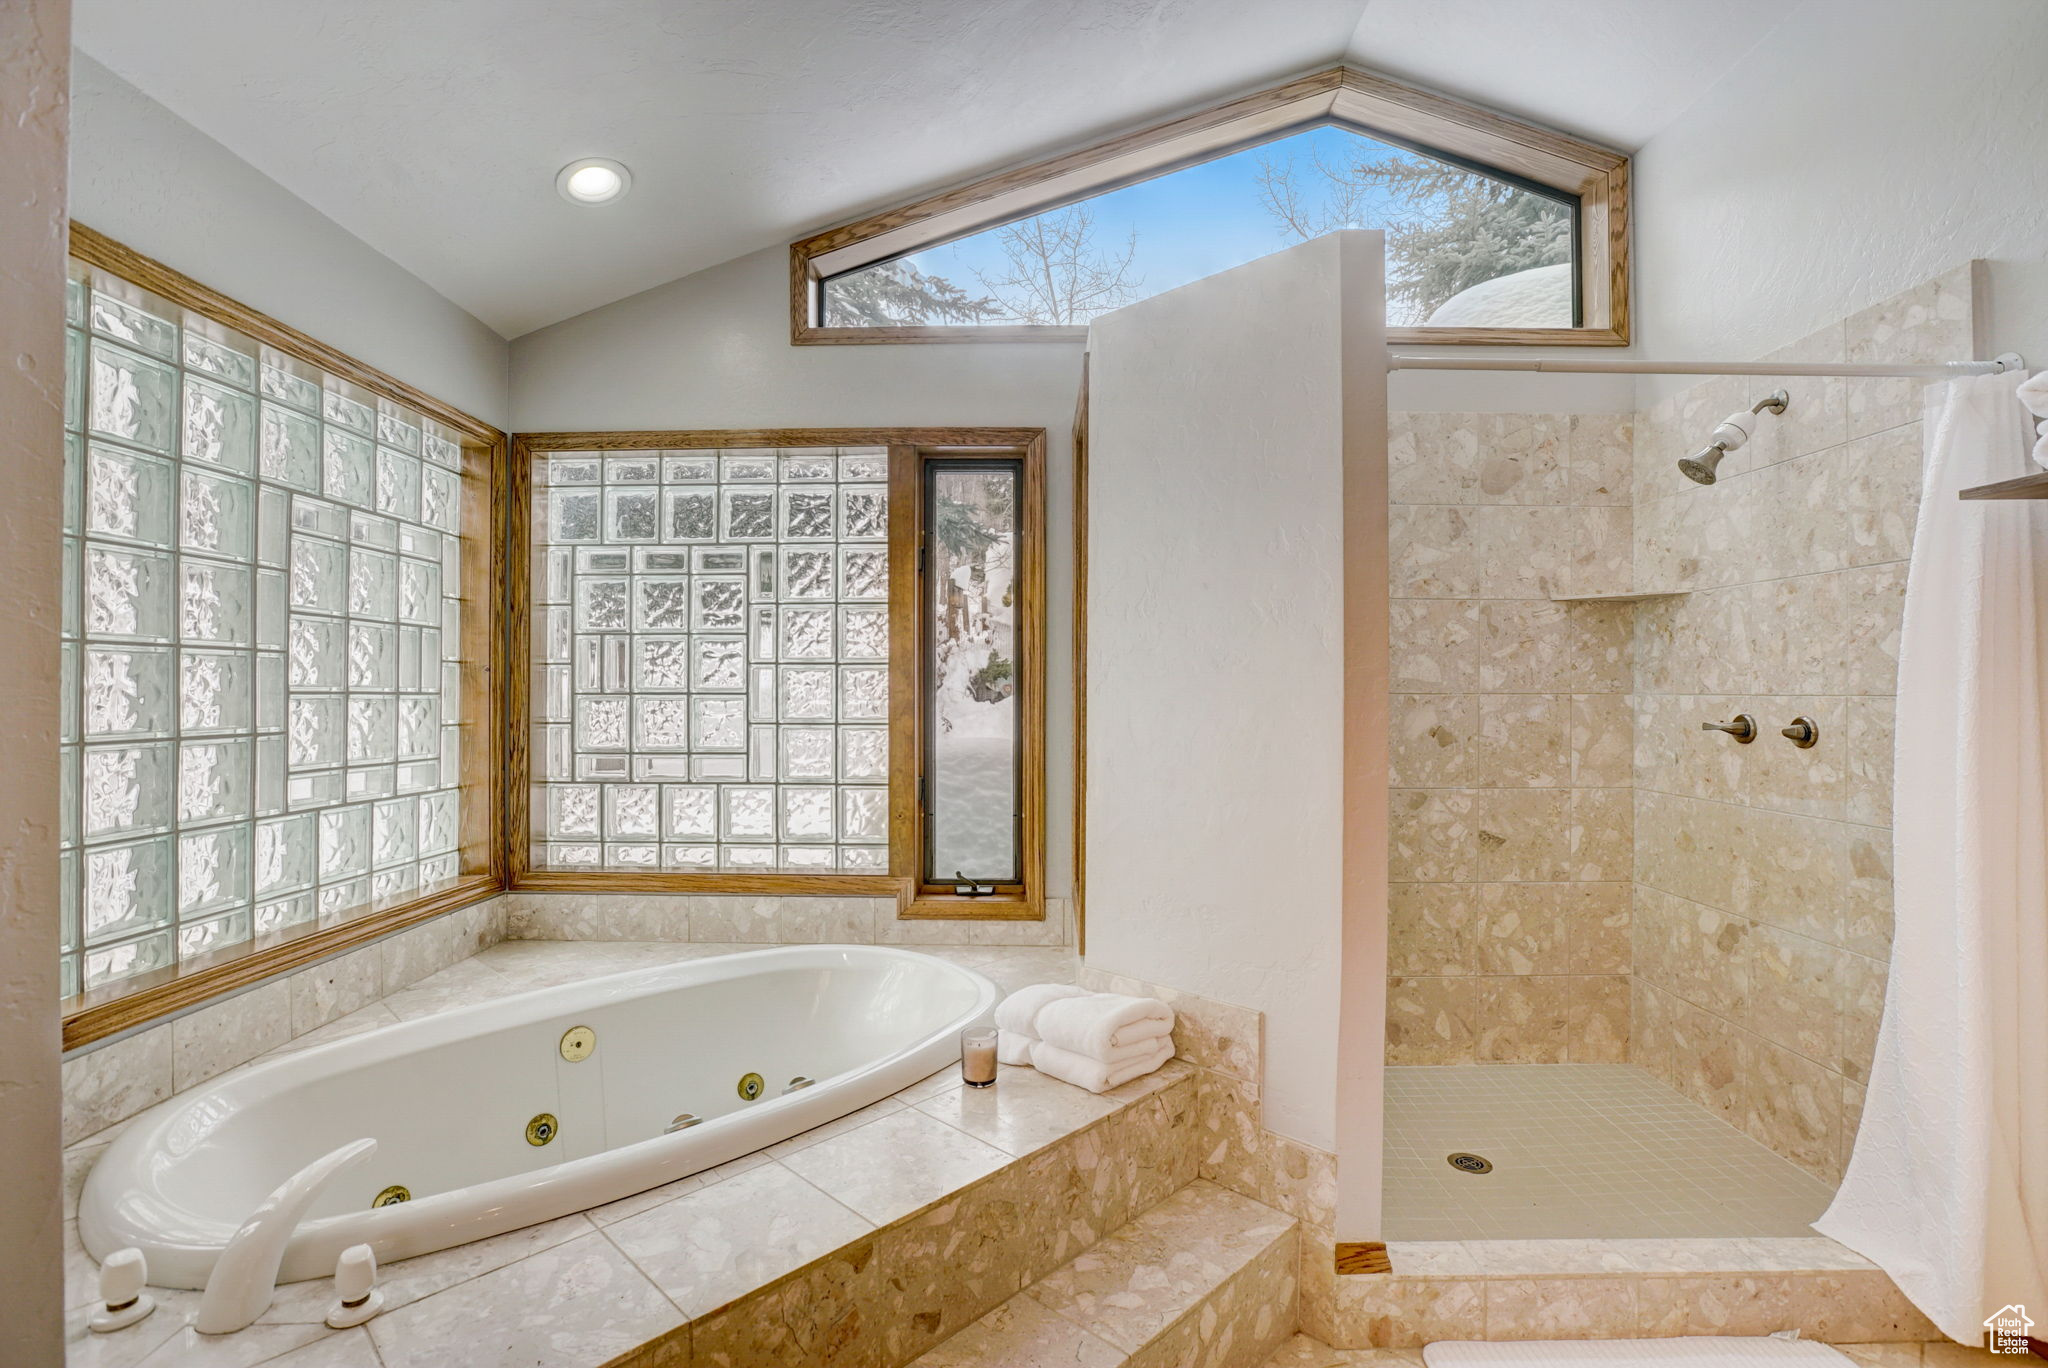 Bathroom with vaulted ceiling and plus walk in shower